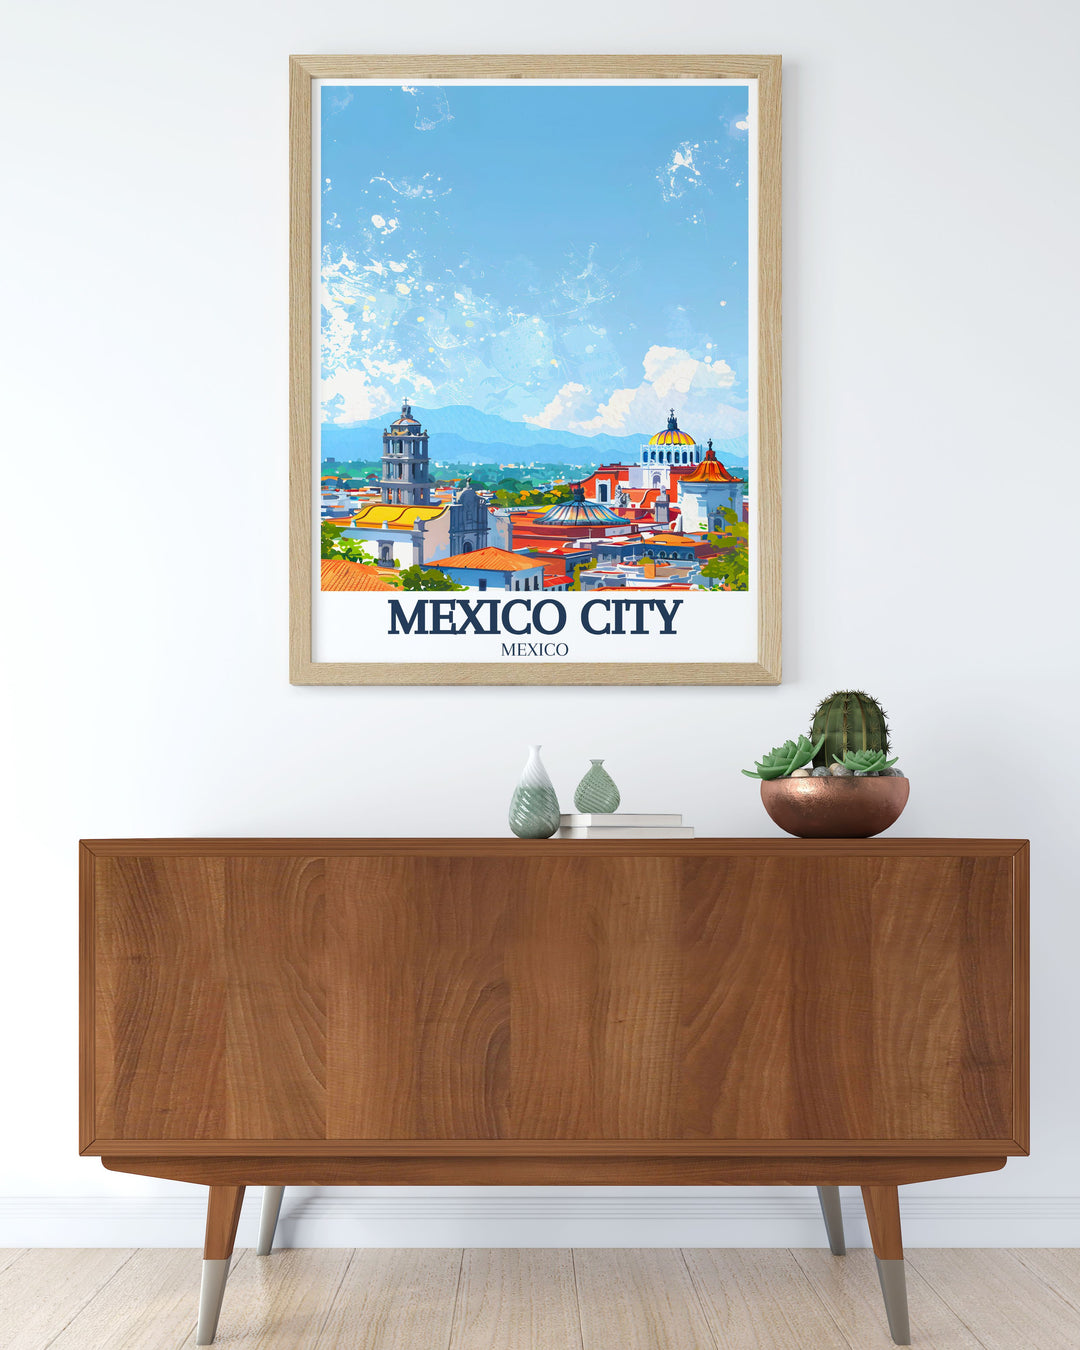 Mexico City decor featuring Metropolitan cathedral Zocalo Chapultepec castle. This vintage print adds a touch of elegance and historical charm to any room making it a standout piece in any collection of Mexico artwork.